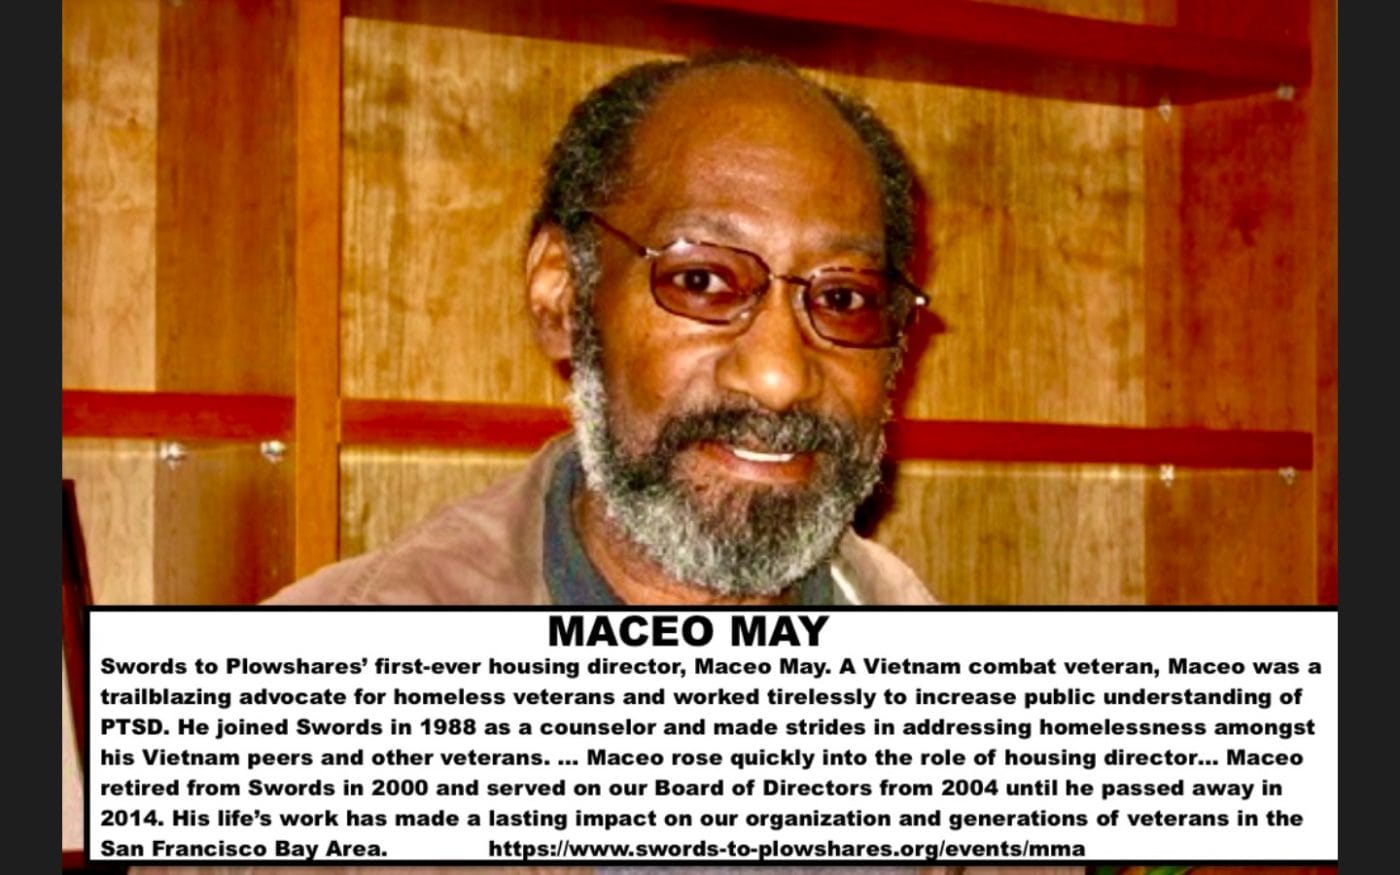 Maceo-May-1400x875, Does Treasure Island’s Equity Vision fix problems in Maceo May’s Veterans’ Housing? , World News & Views 